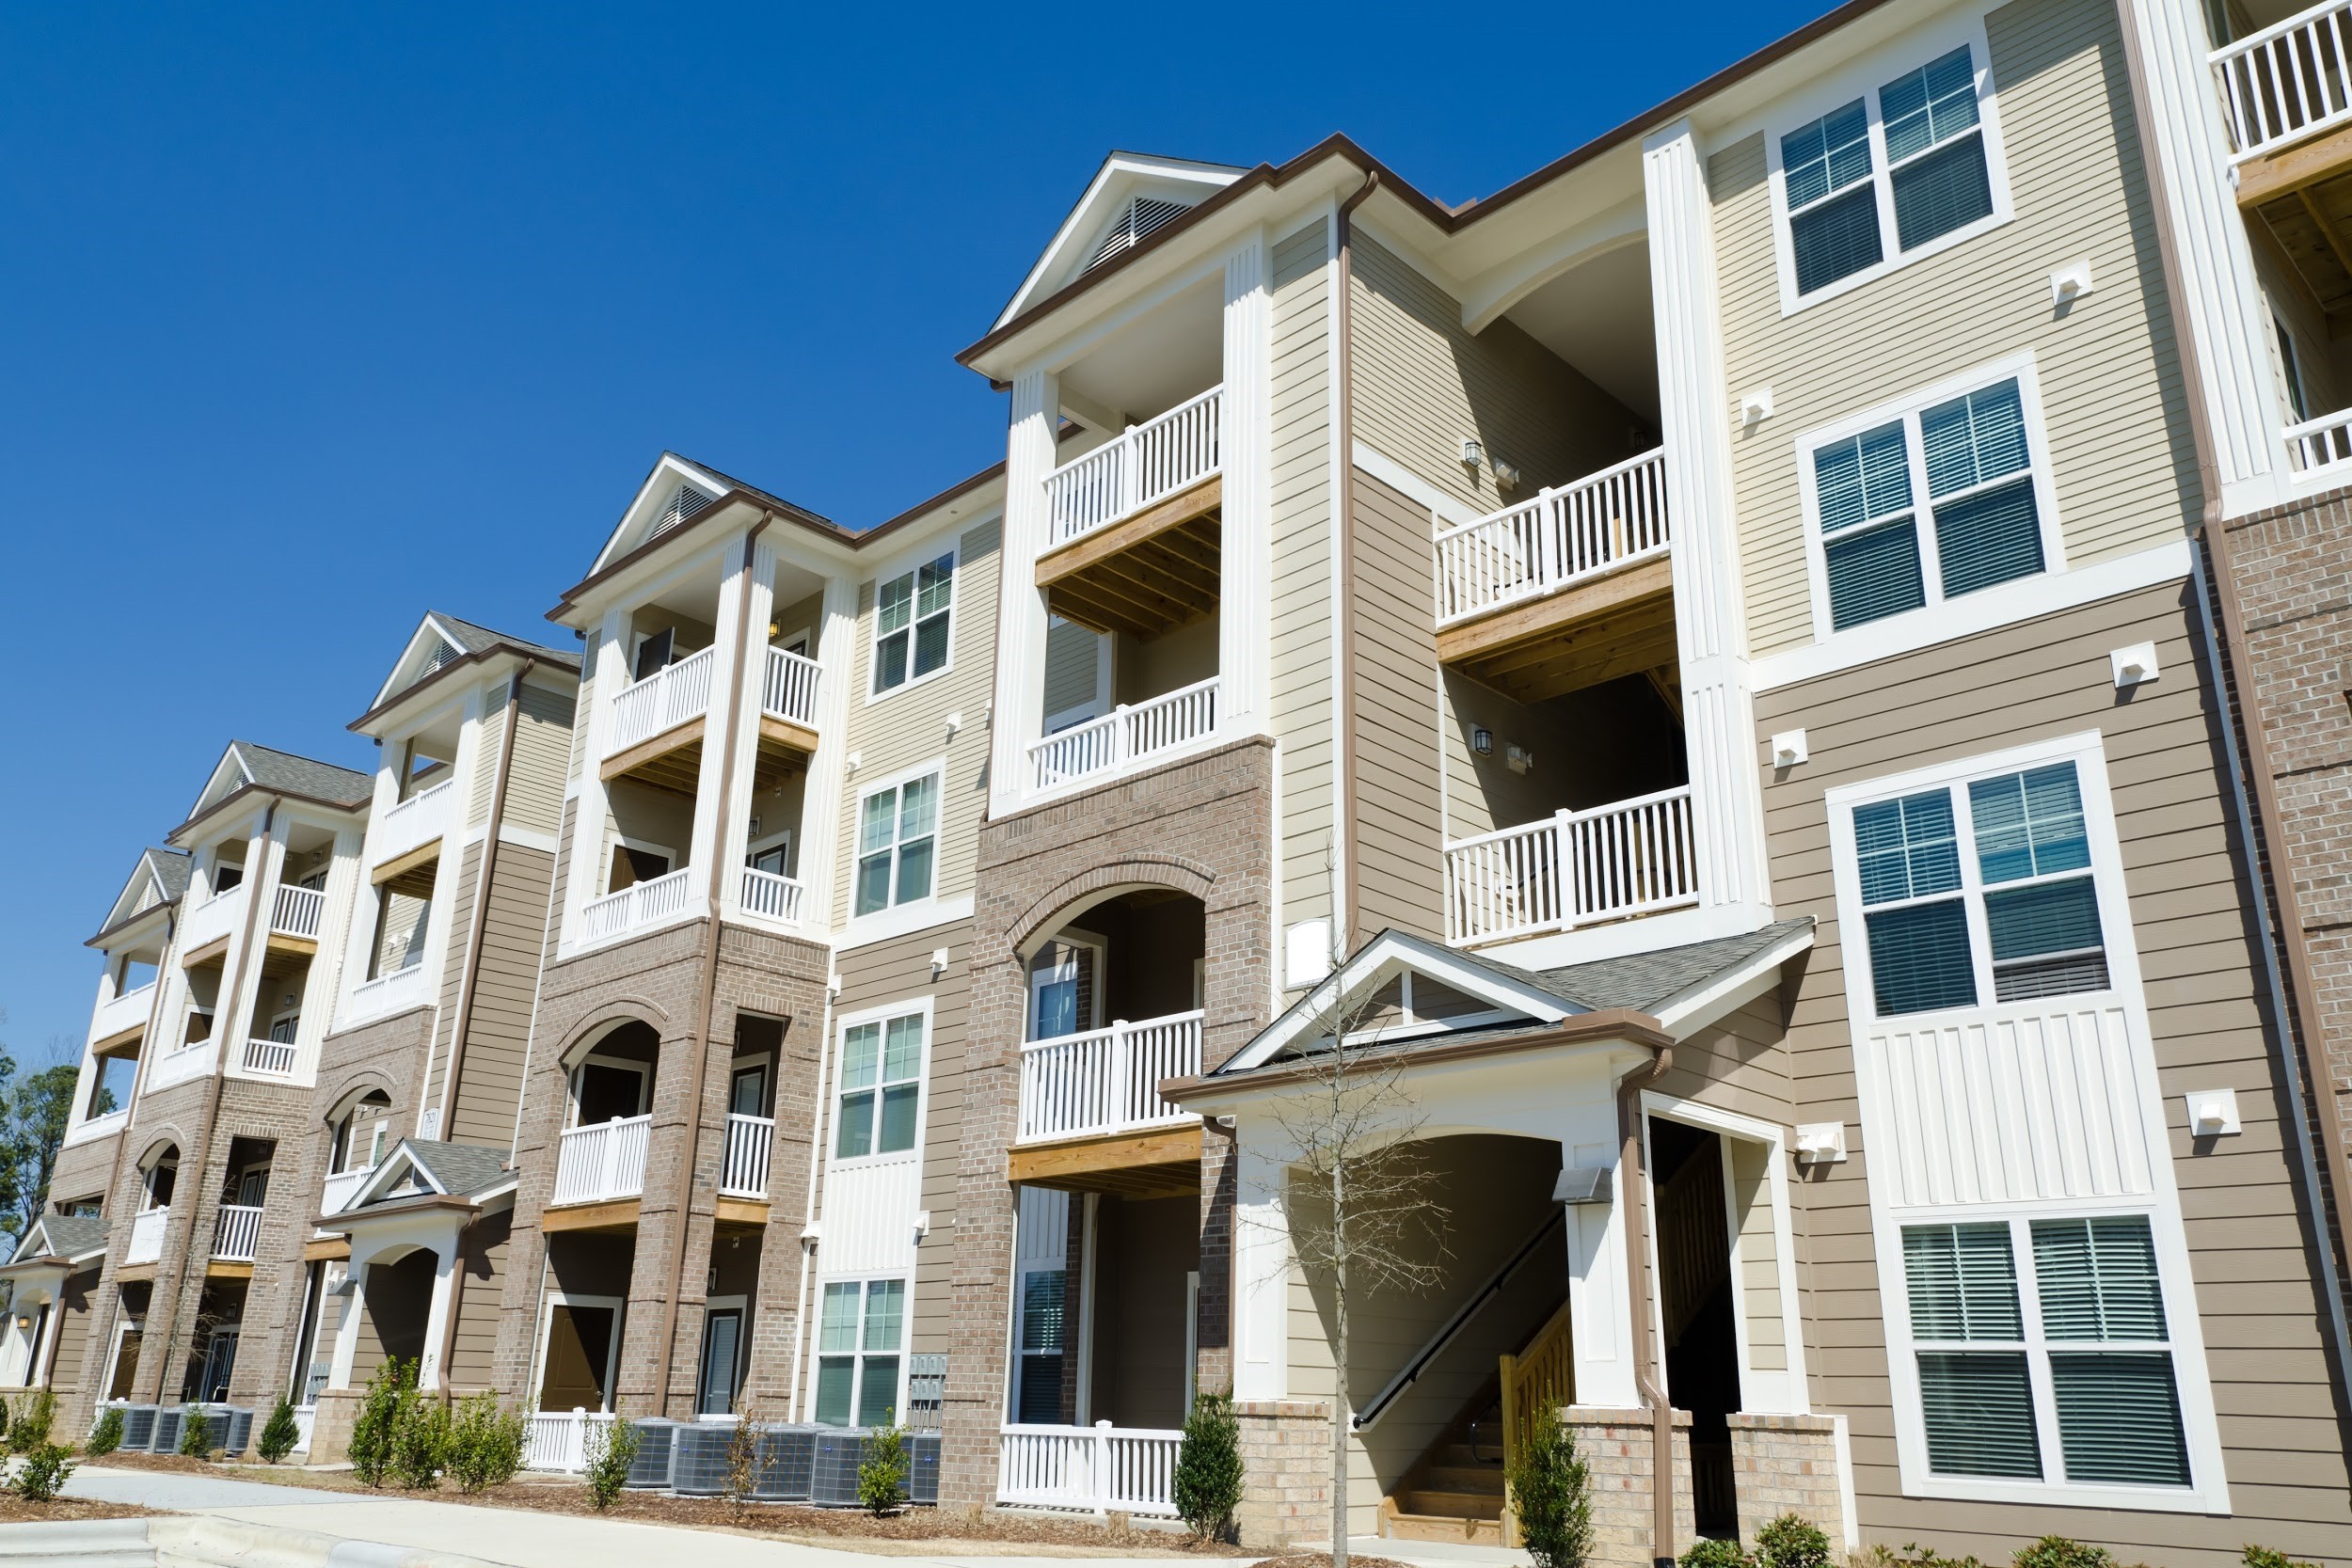 American Apartment Owners Association | LinkedIn